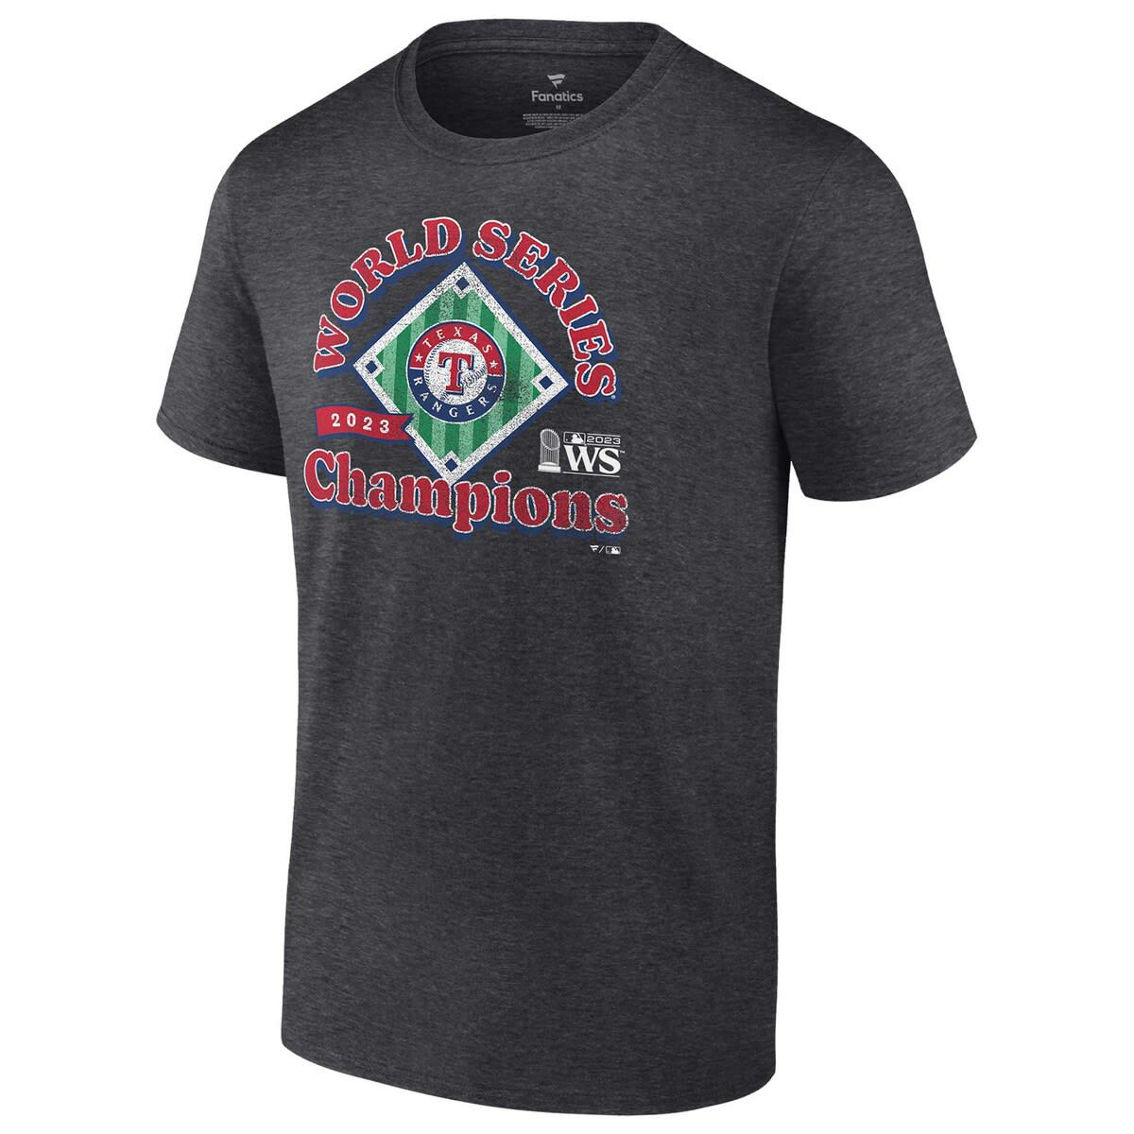 Men's Heather Charcoal Texas Rangers World Series Champs Franchise Guys T-Shirt - Image 3 of 4